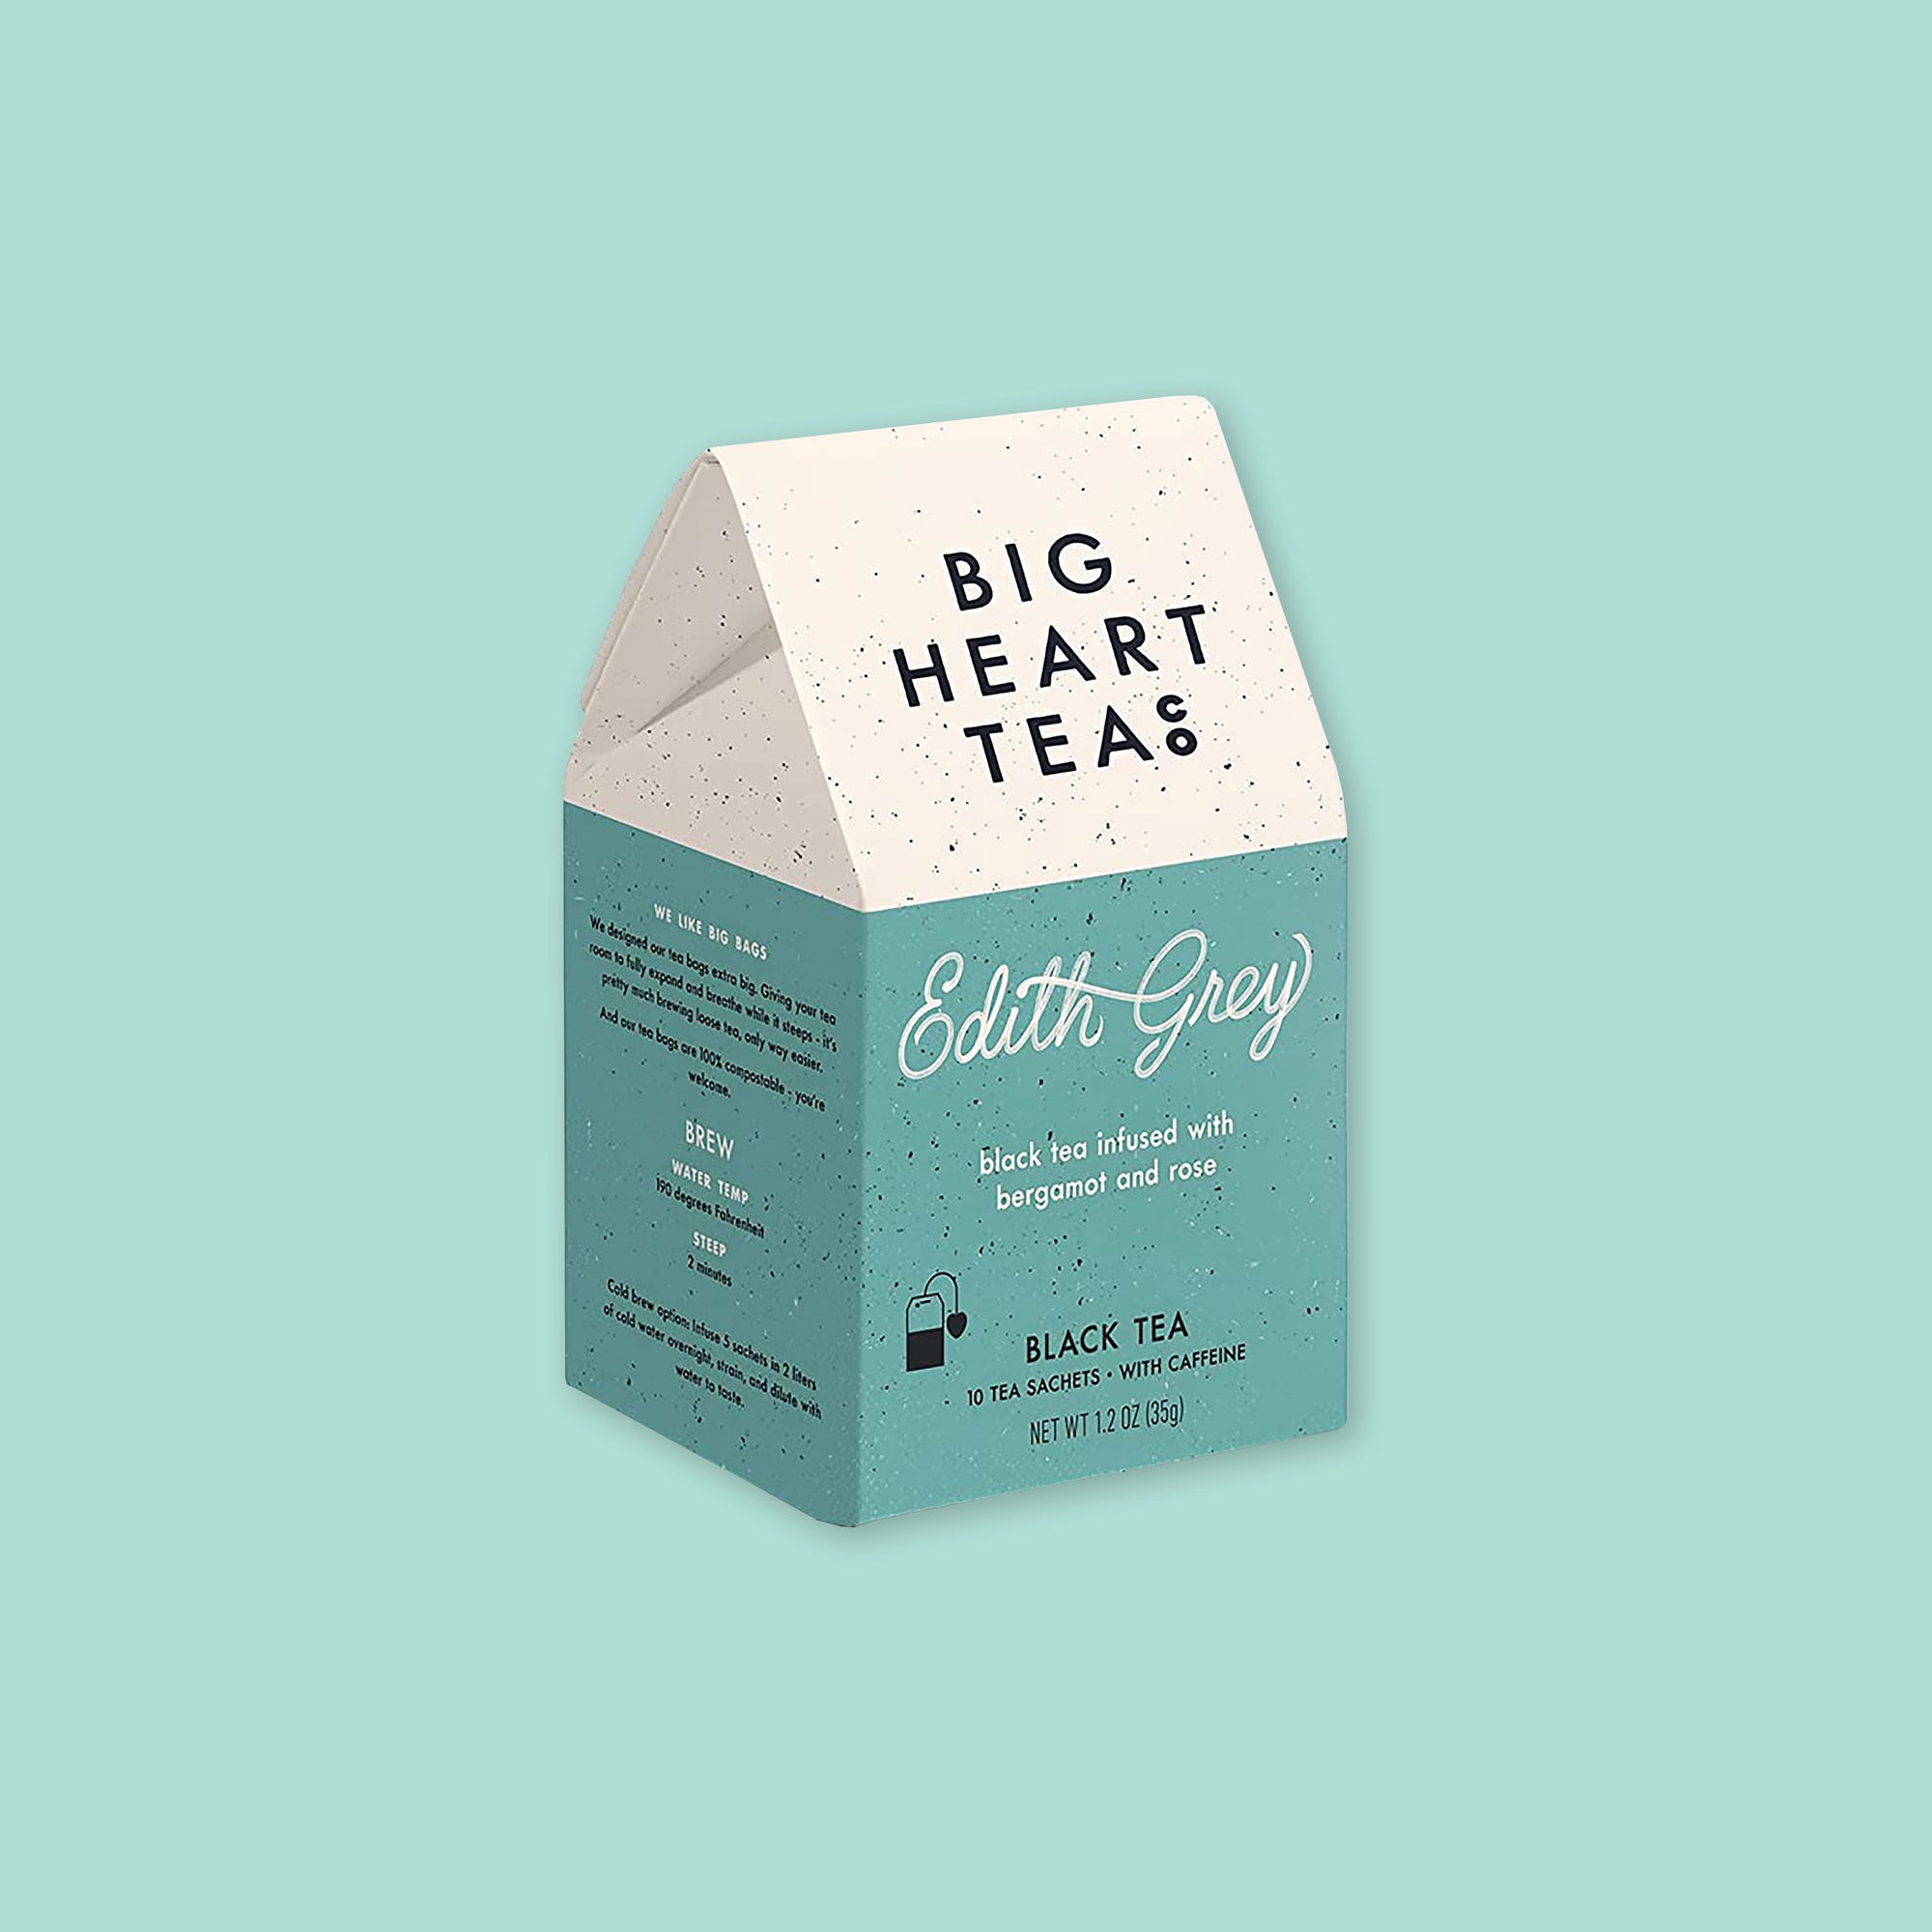 On a mint green background sits a tented carton. The tented part is white and the bottom part is a dark mint. It has black flecks all over it. It is 'BIG HEART TEA' and says "Edith Grey" in white, handwritten scipt lettering. Under that it says in white "black tea infused with bergamot and rose" in lower case block font. It has an black illustration of a tea bag. 'BLACK TEA' 10 tea sachets • with caffeine, net wt 1.2 oz (35g)